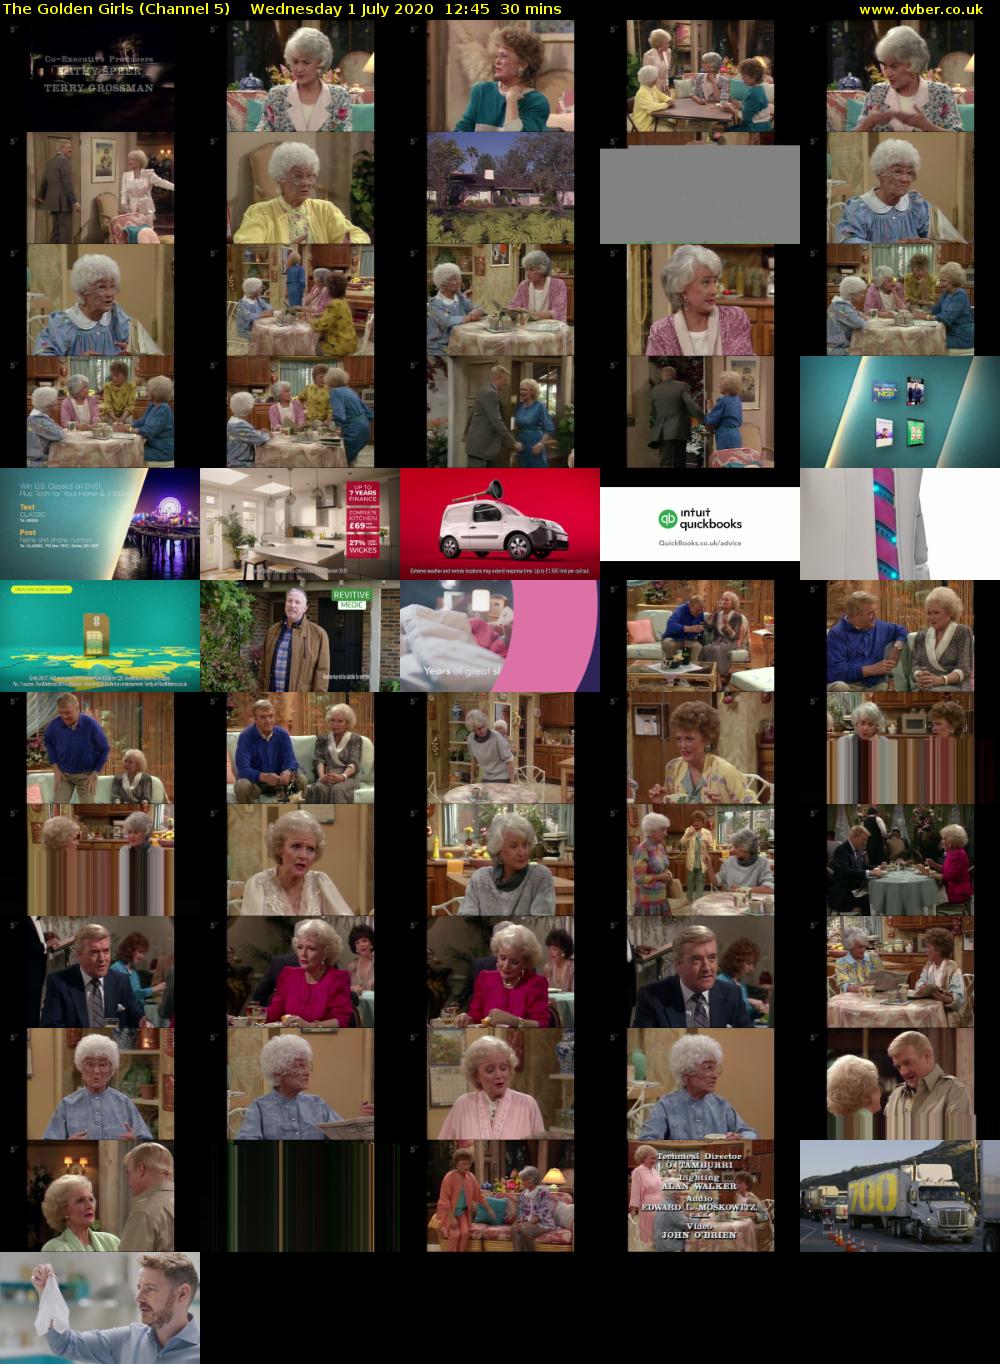 The Golden Girls (Channel 5) Wednesday 1 July 2020 12:45 - 13:15